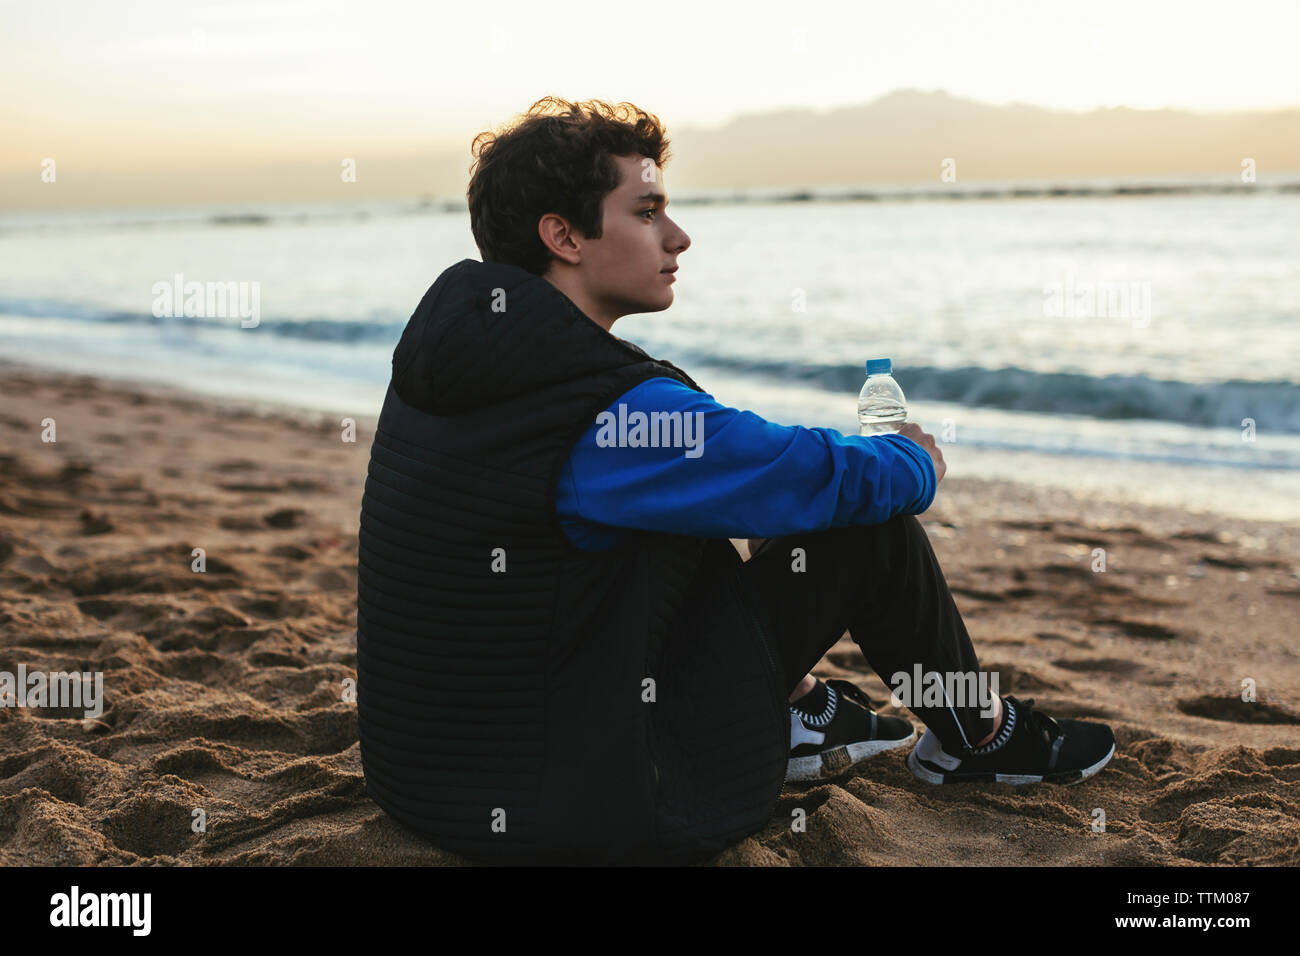 https://c8.alamy.com/comp/TTM087/side-view-of-thoughtful-teenage-boy-holding-water-bottle-while-sitting-at-beach-TTM087.jpg